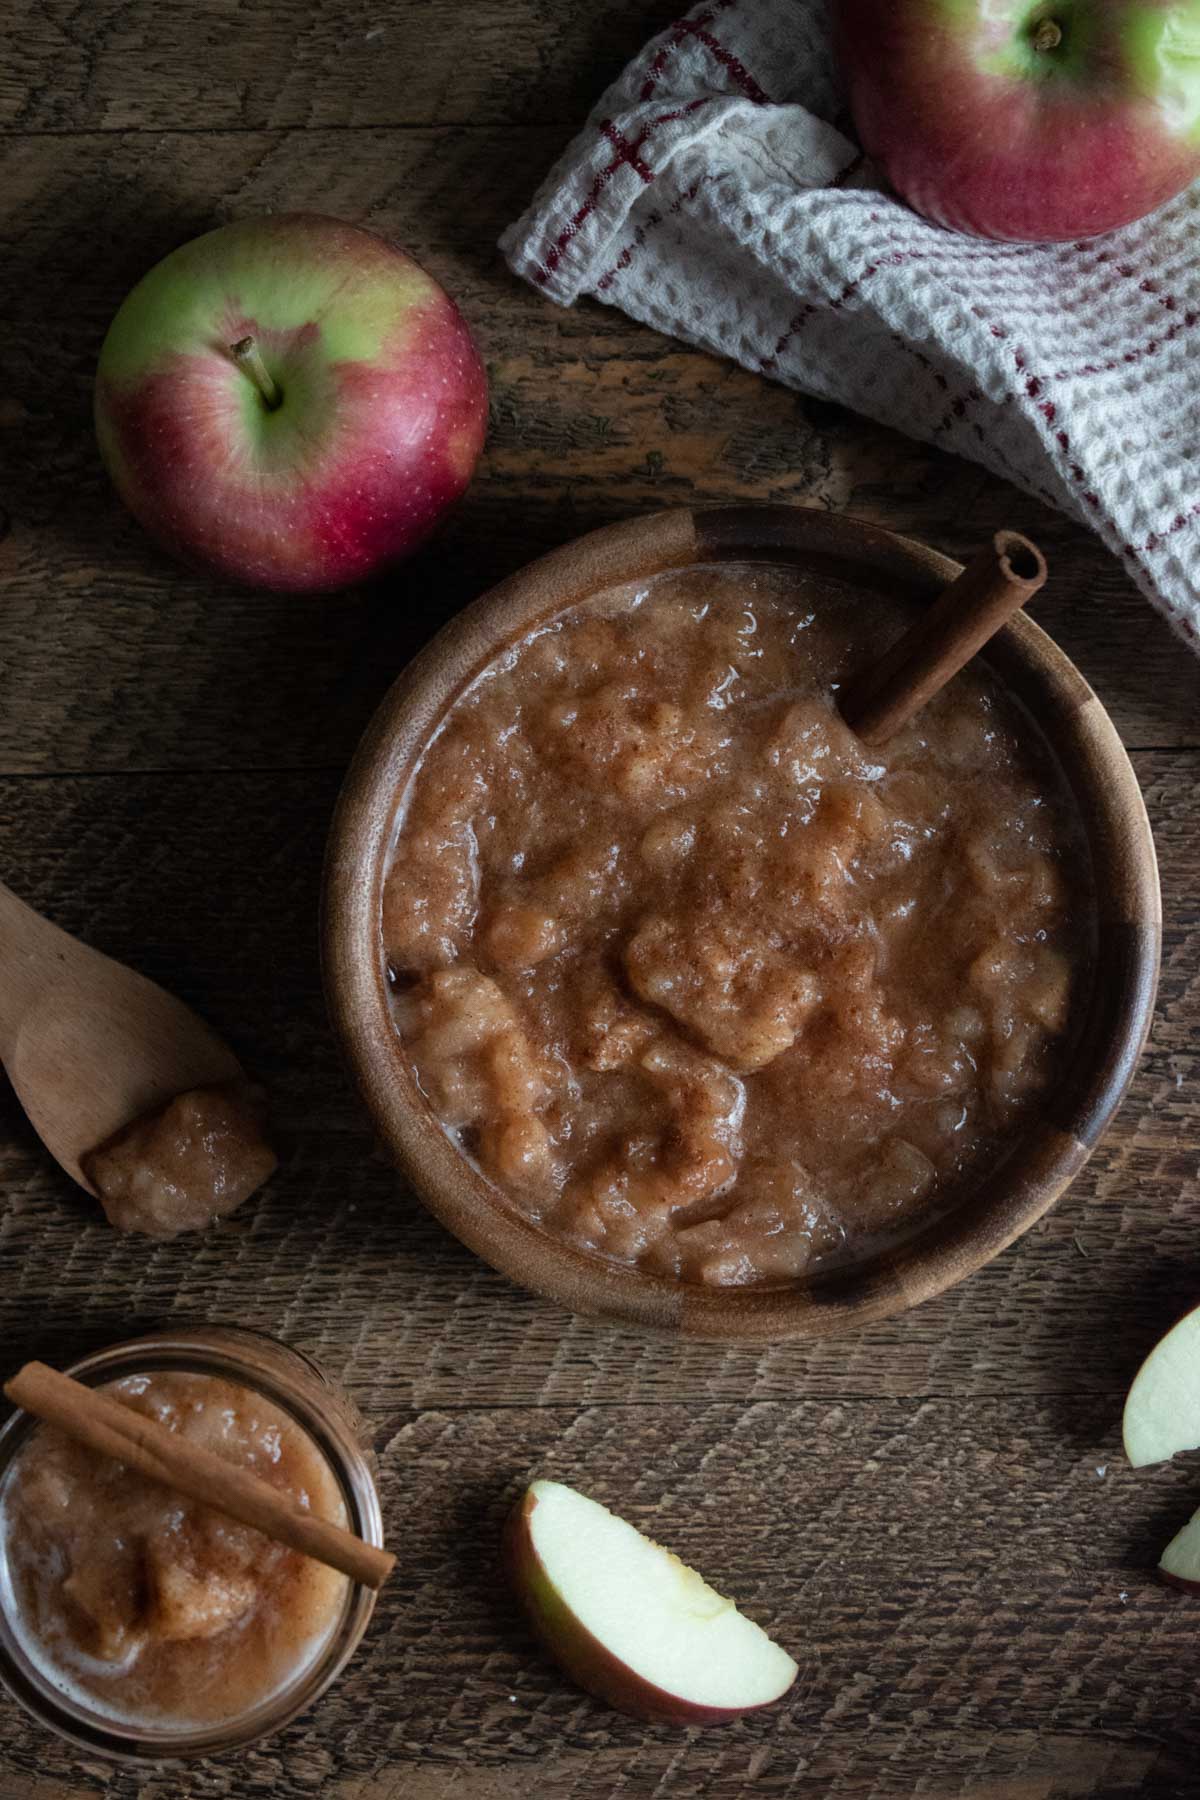 homemade crockpot applesauce sitting in a wooden bowl on a wooden table with apples scattered around